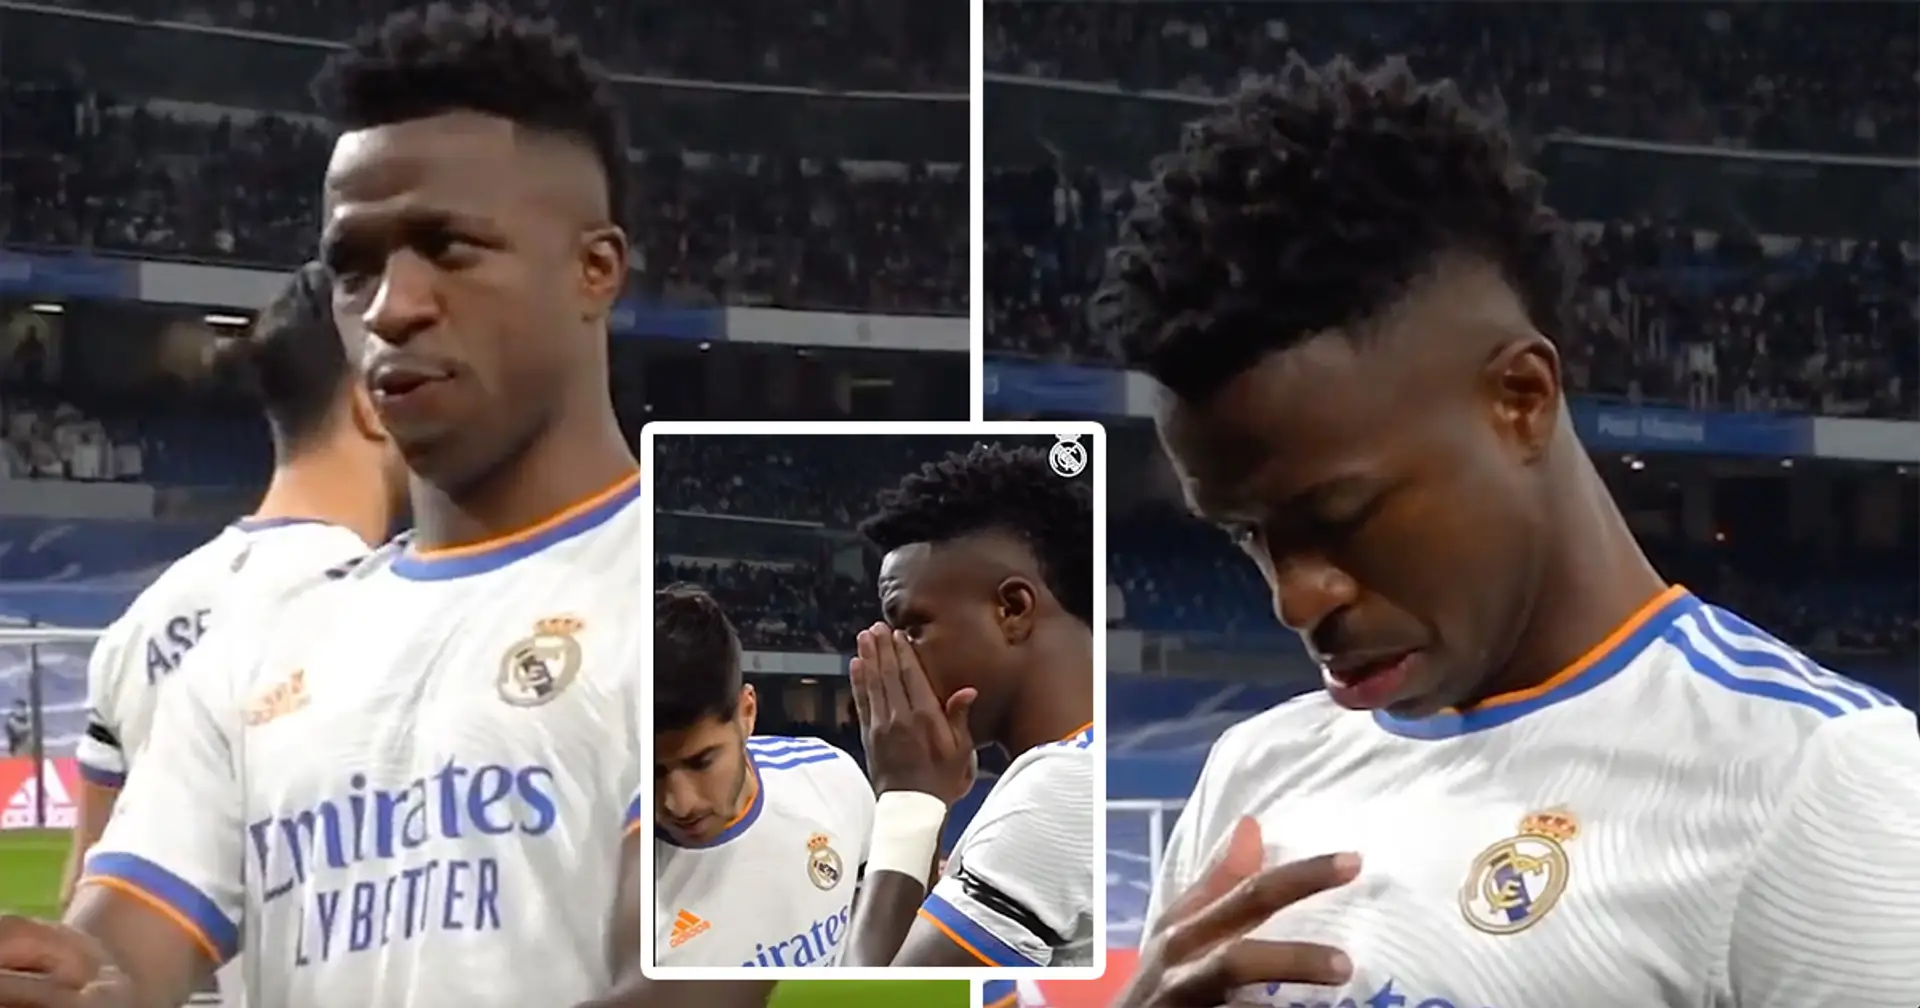 Following Patrick Vieira: Vinicius Junior's pre-match ritual revealed by official Real Madrid video